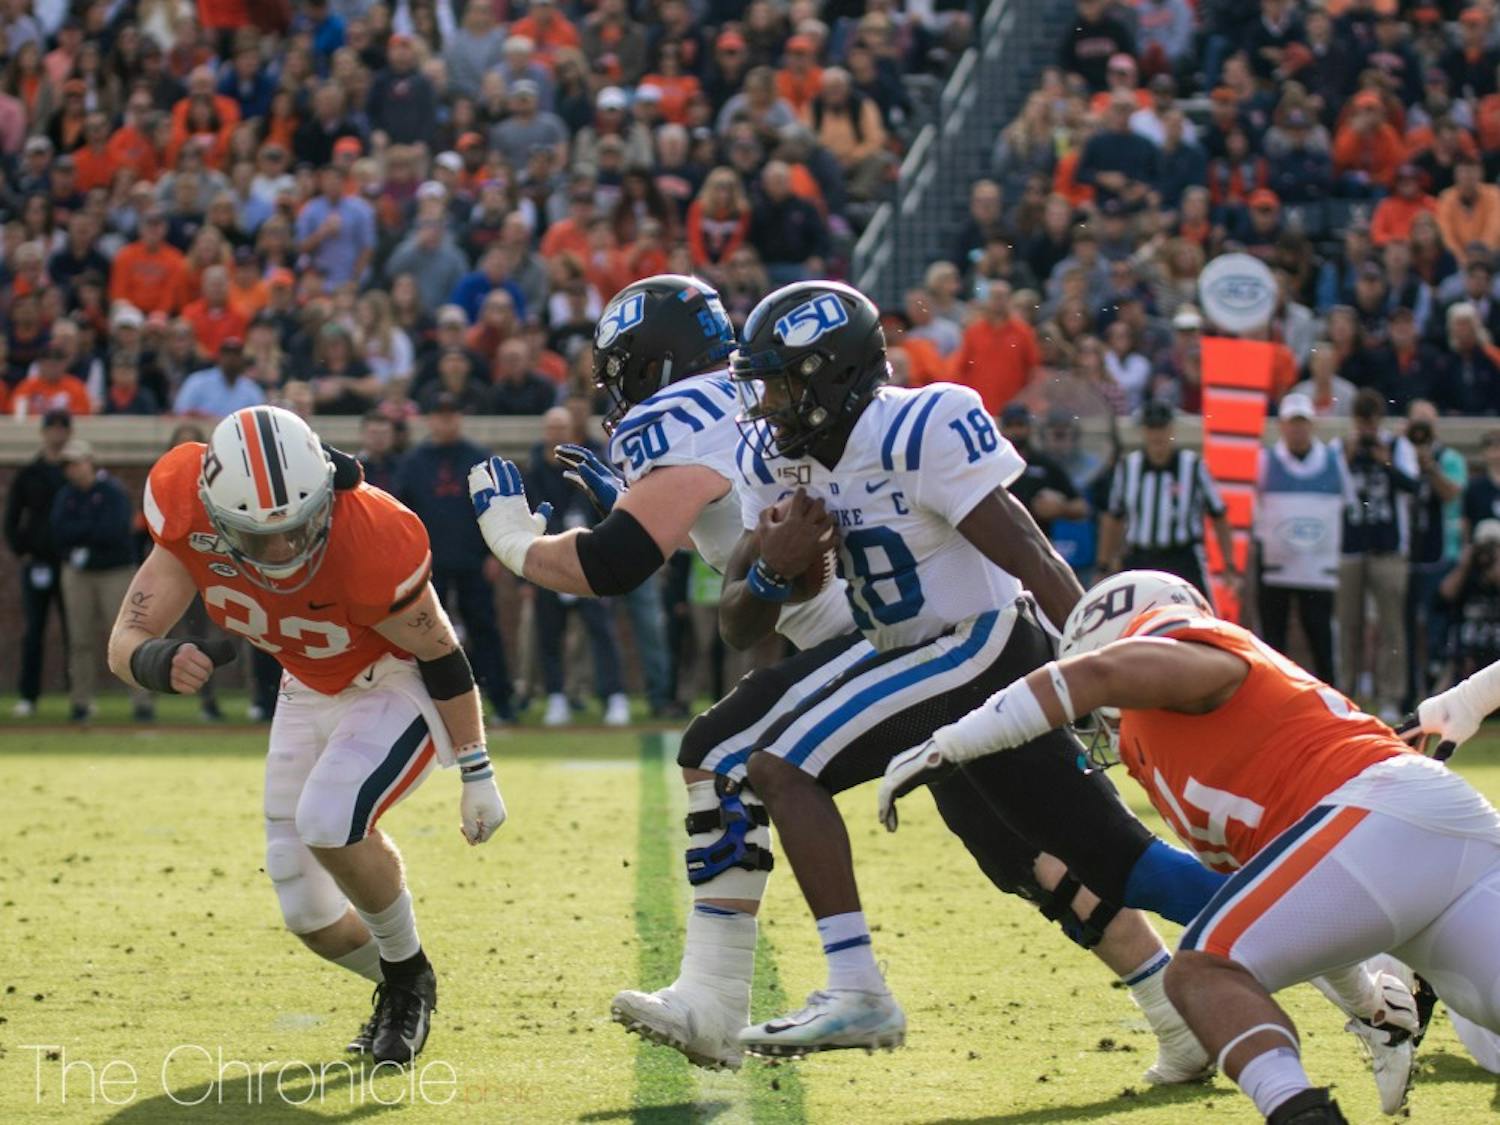 Duke played the UVA Cavaliers at Scott Stadium in Charlottesville, VA on Saturday afternoon. The Blue Devils walked away with a loss, the final score being 14-48.&nbsp;